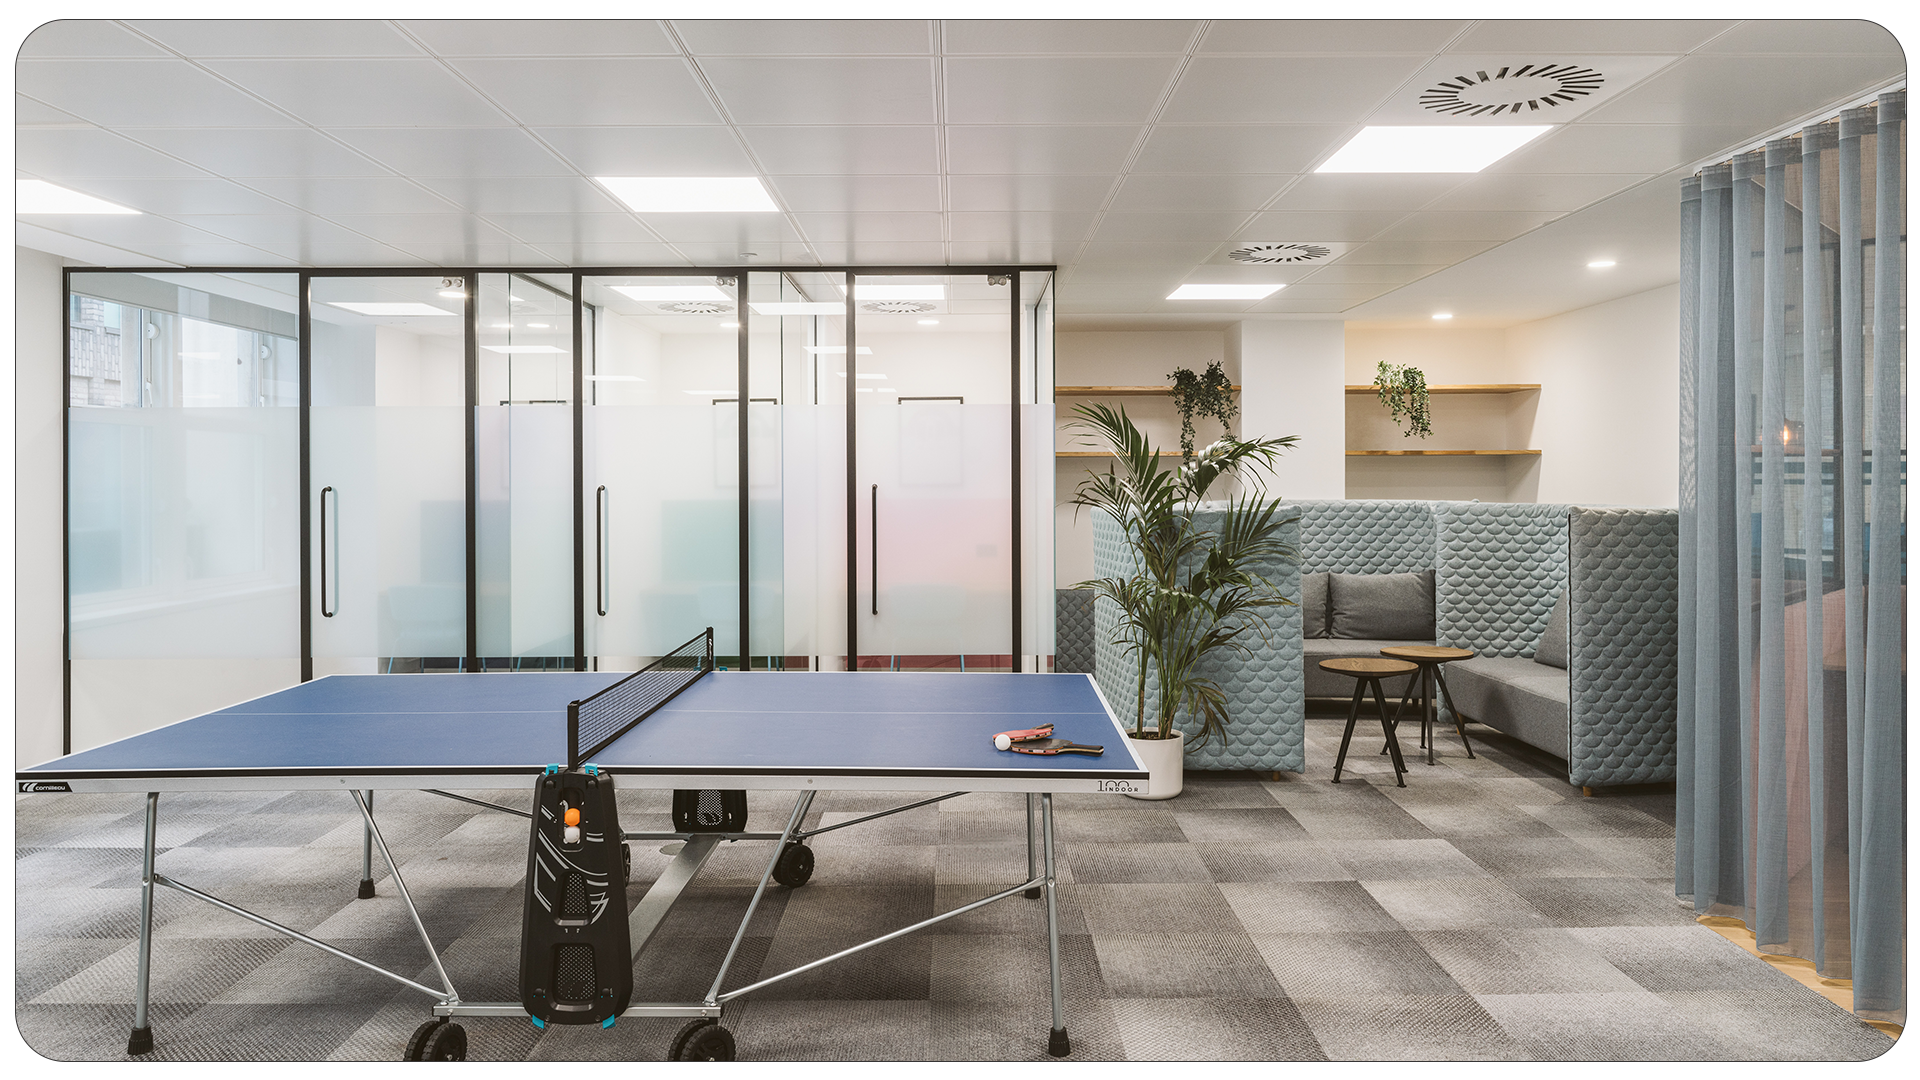 Office breakout area with ping pong table and enclosed seating with plants